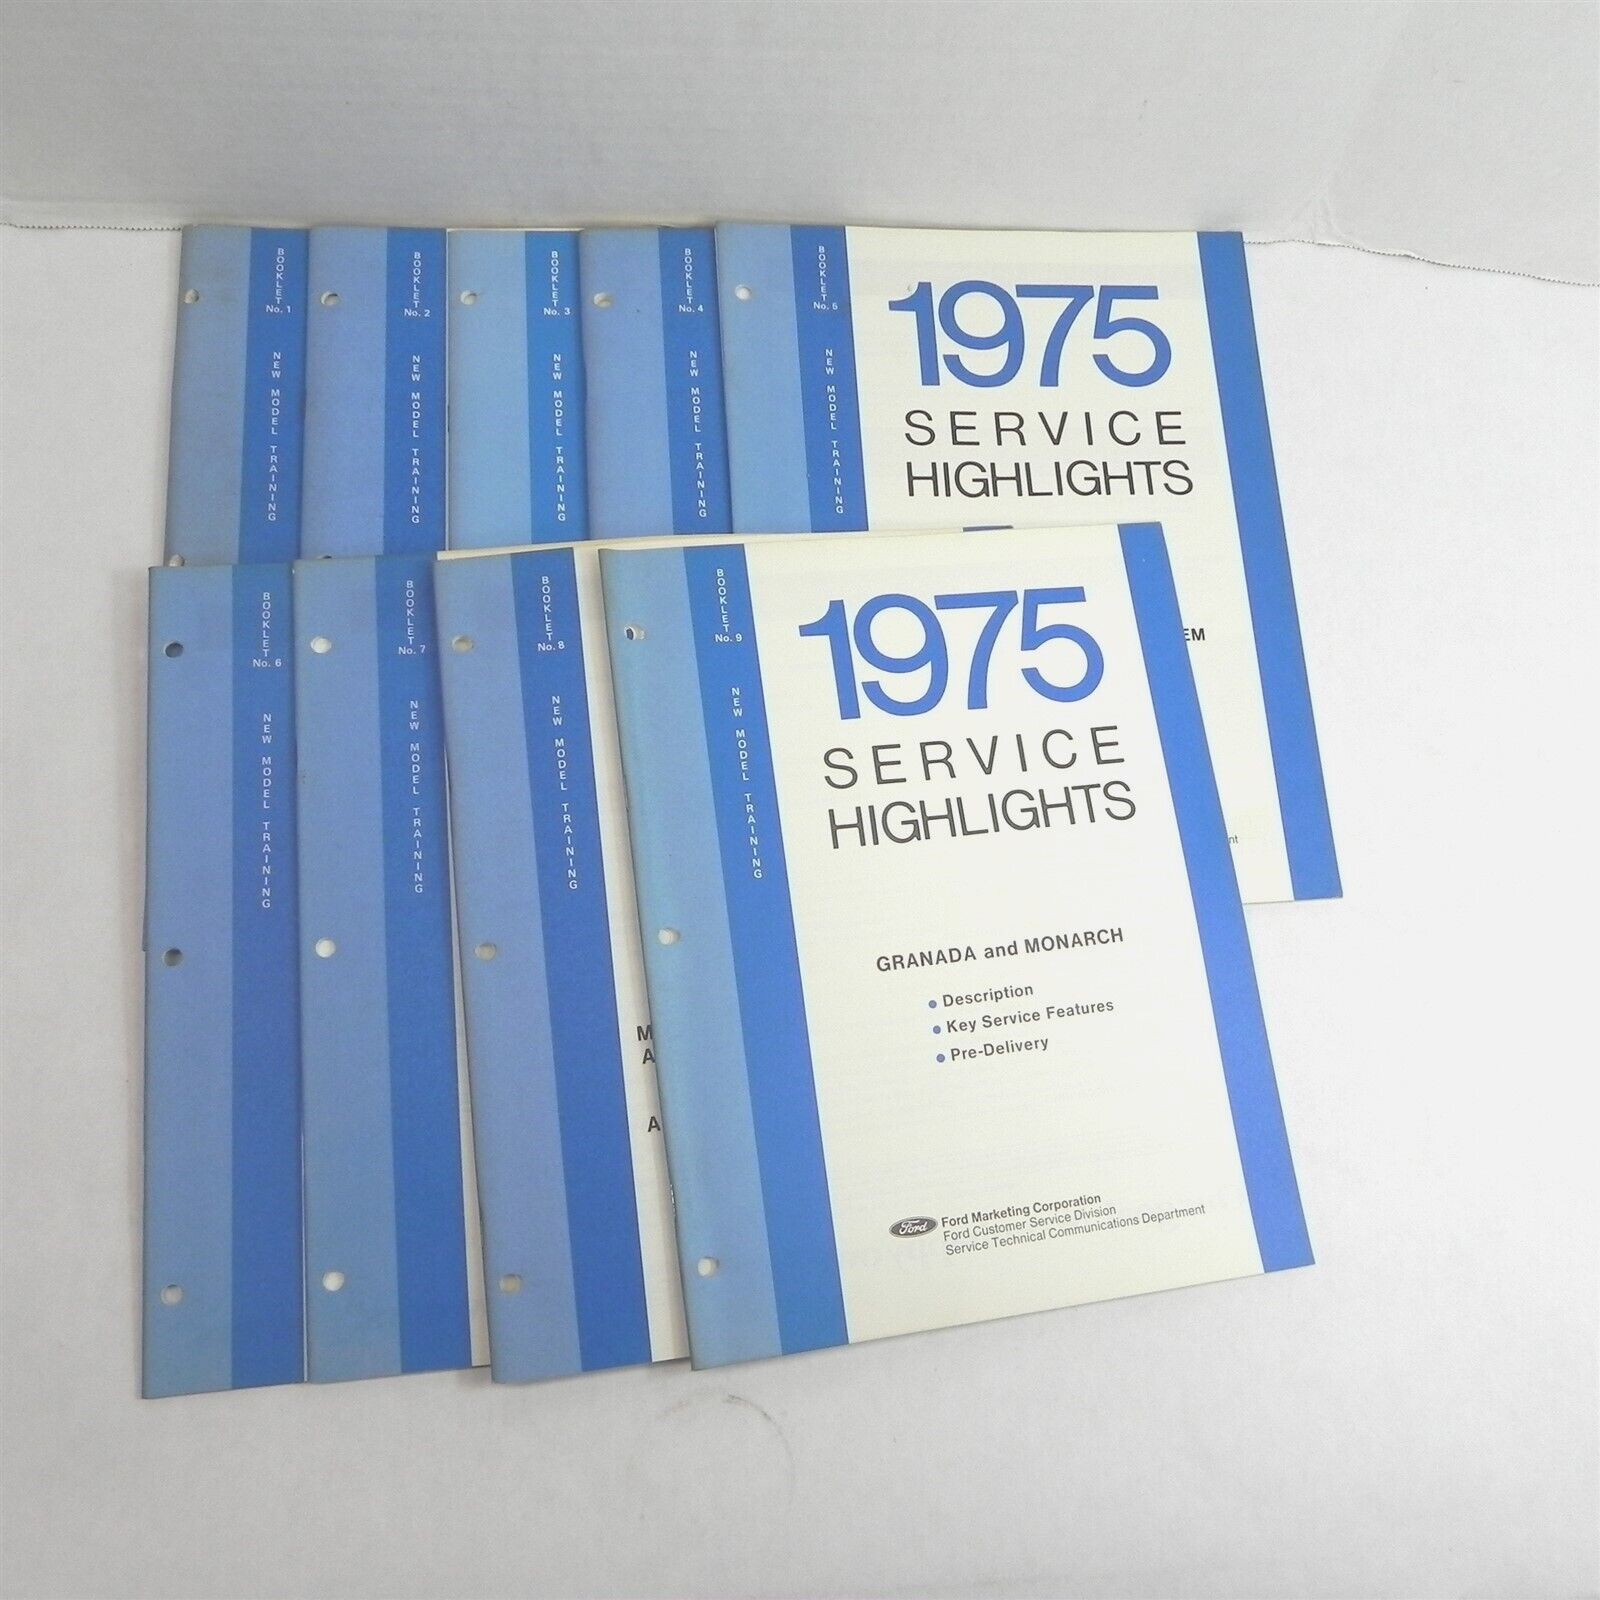 VINTAGE 1975 FORD SERVICE HIGHLIGHTS SET OF 9 REPAIR MANUALS GUIDE 